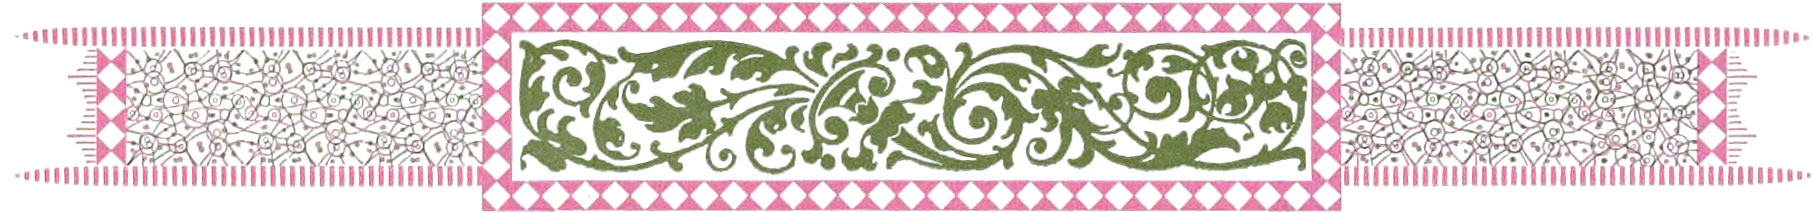 Ornate border comprising green and pink colors